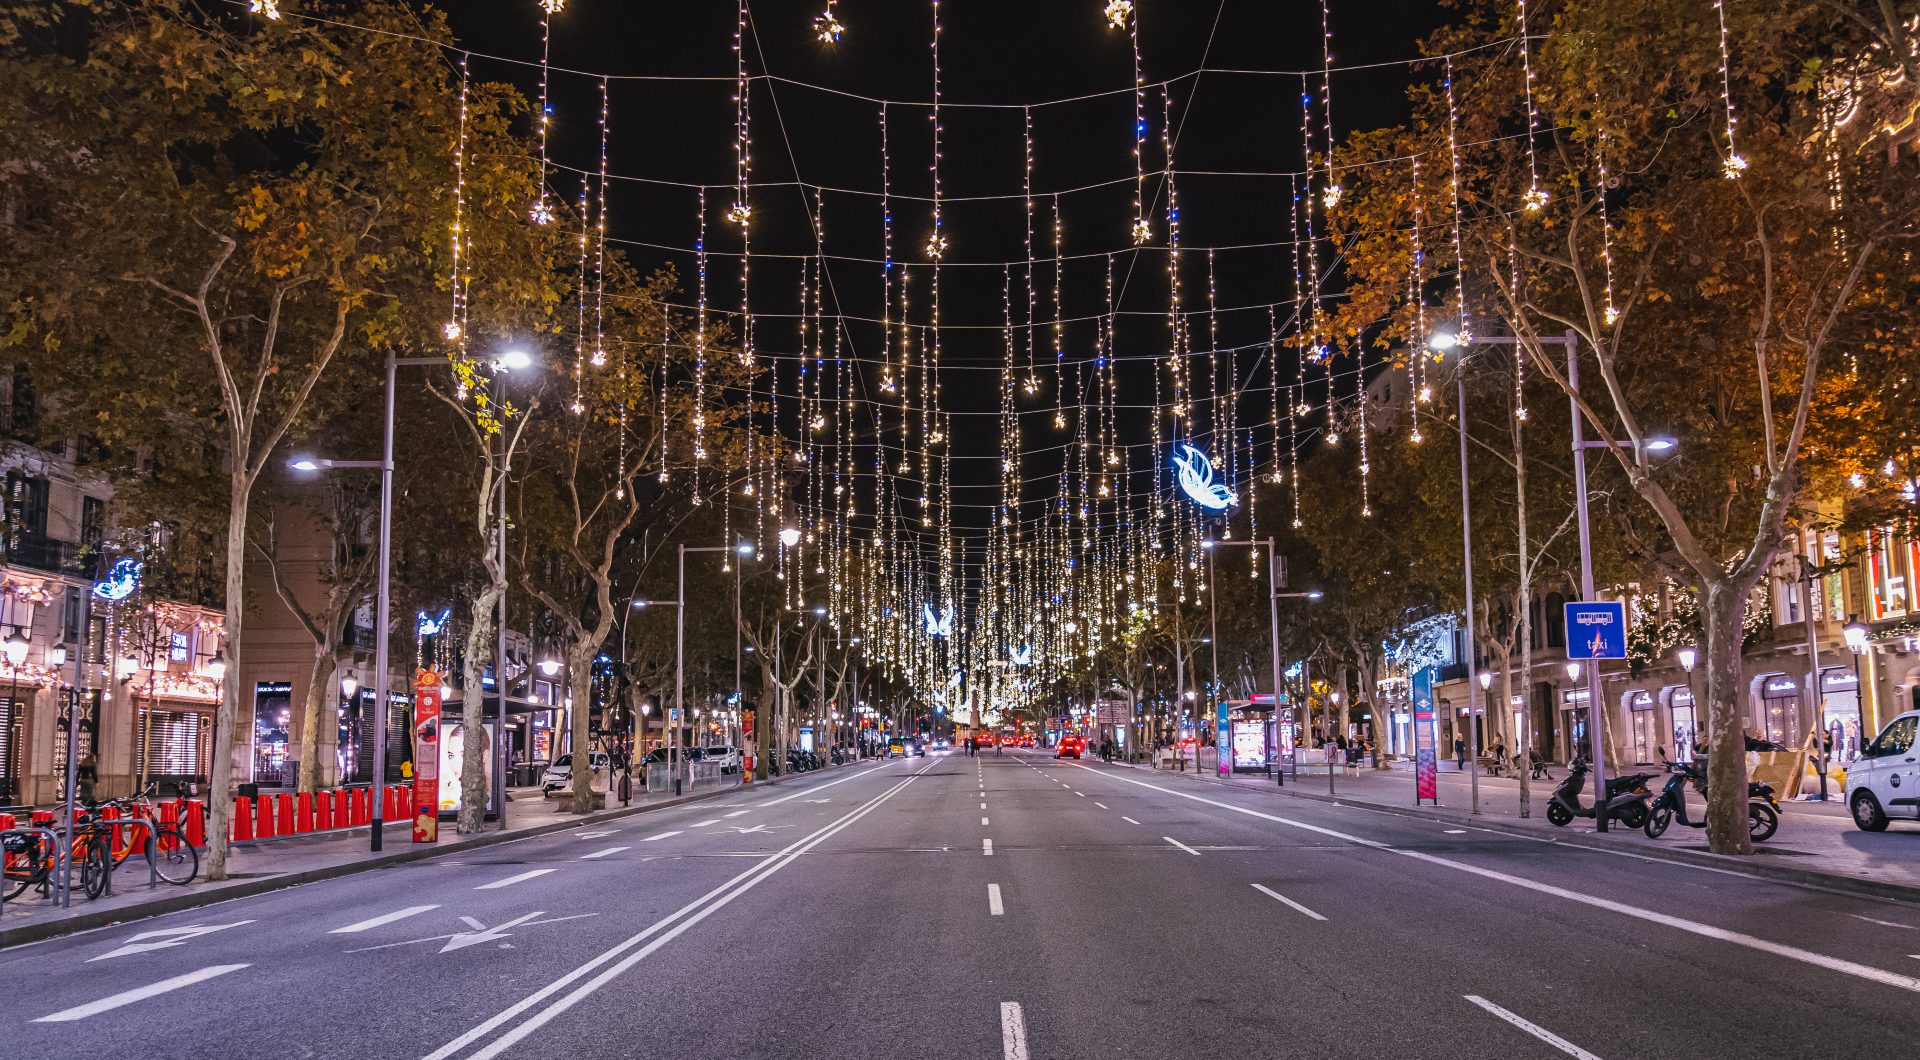 The best Christmas lights in Barcelona are just a few steps away from Hotel Regina 